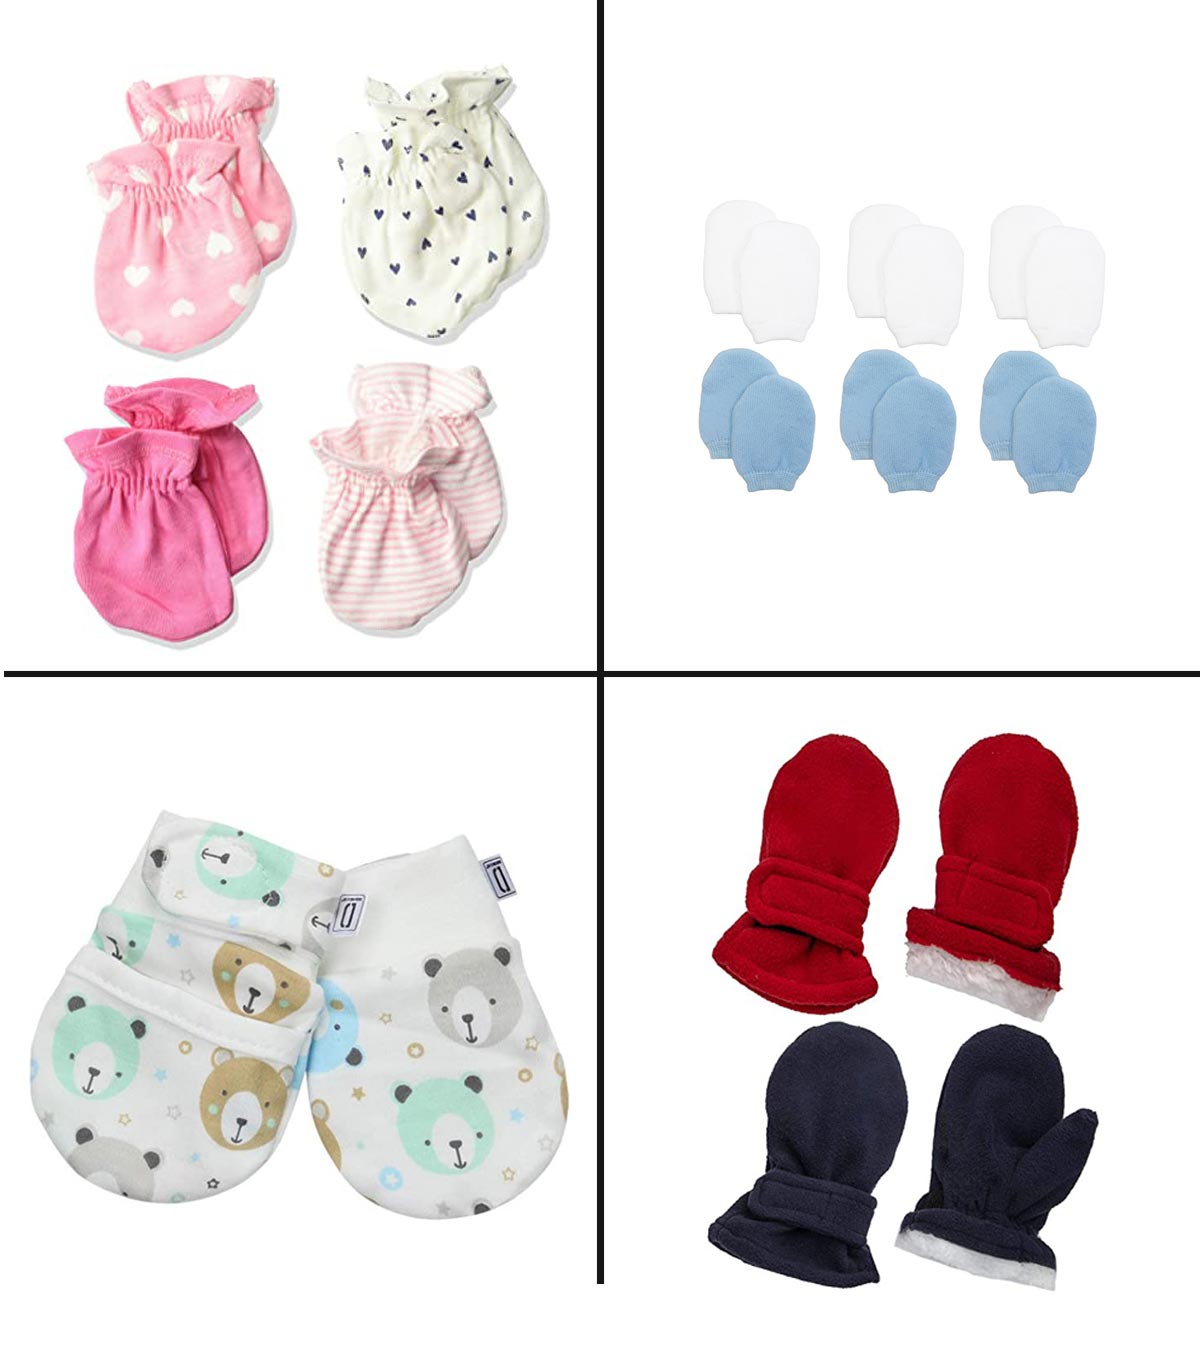 Babies 4pk Mittens Set Warm and Cosy Winter Deal Clean Offer Bargain 